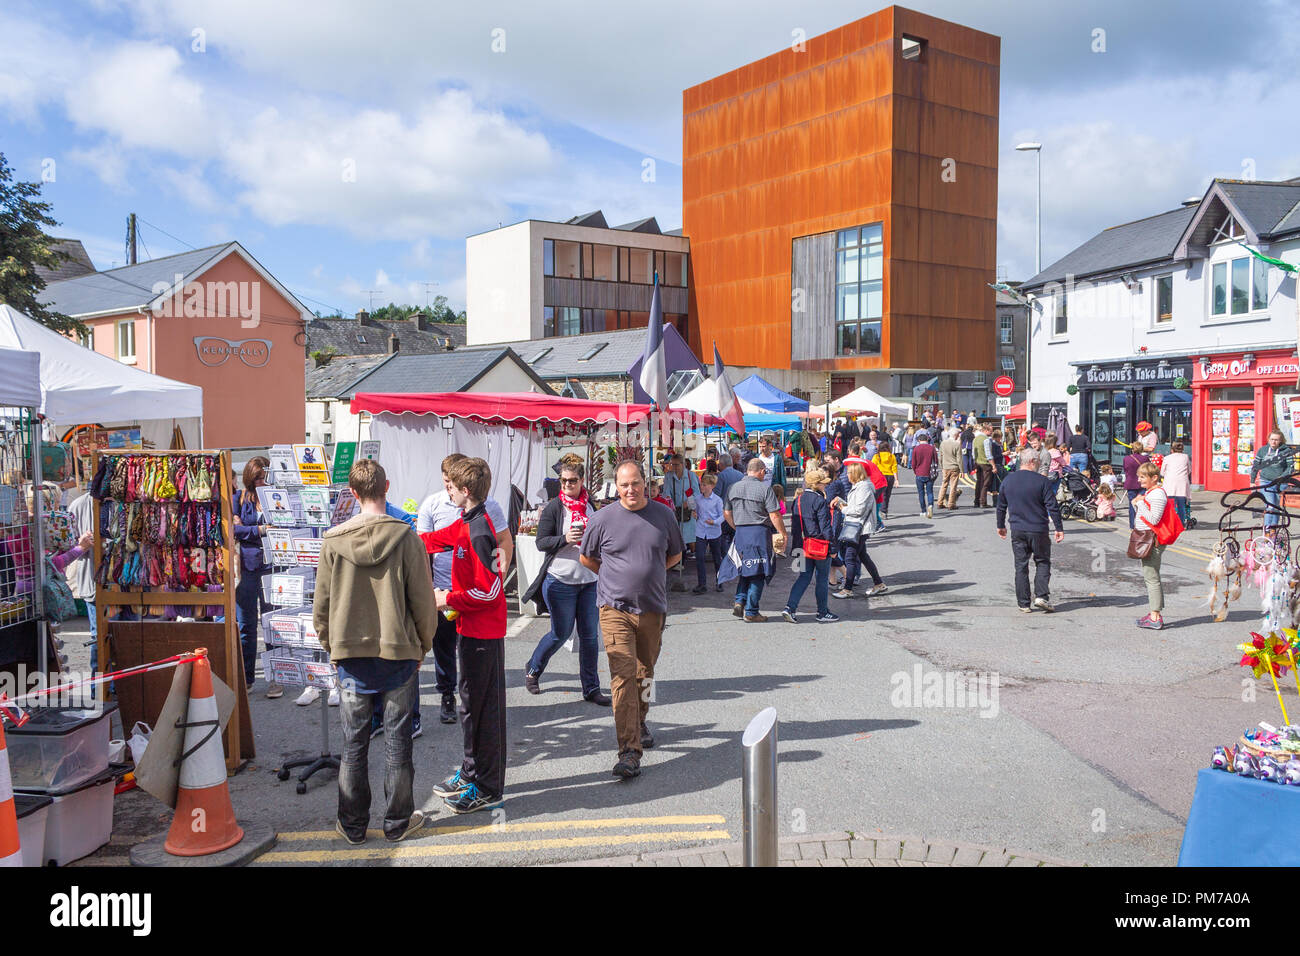 crowds shopping at a street market in skibbereen west cork ireland Stock Photo